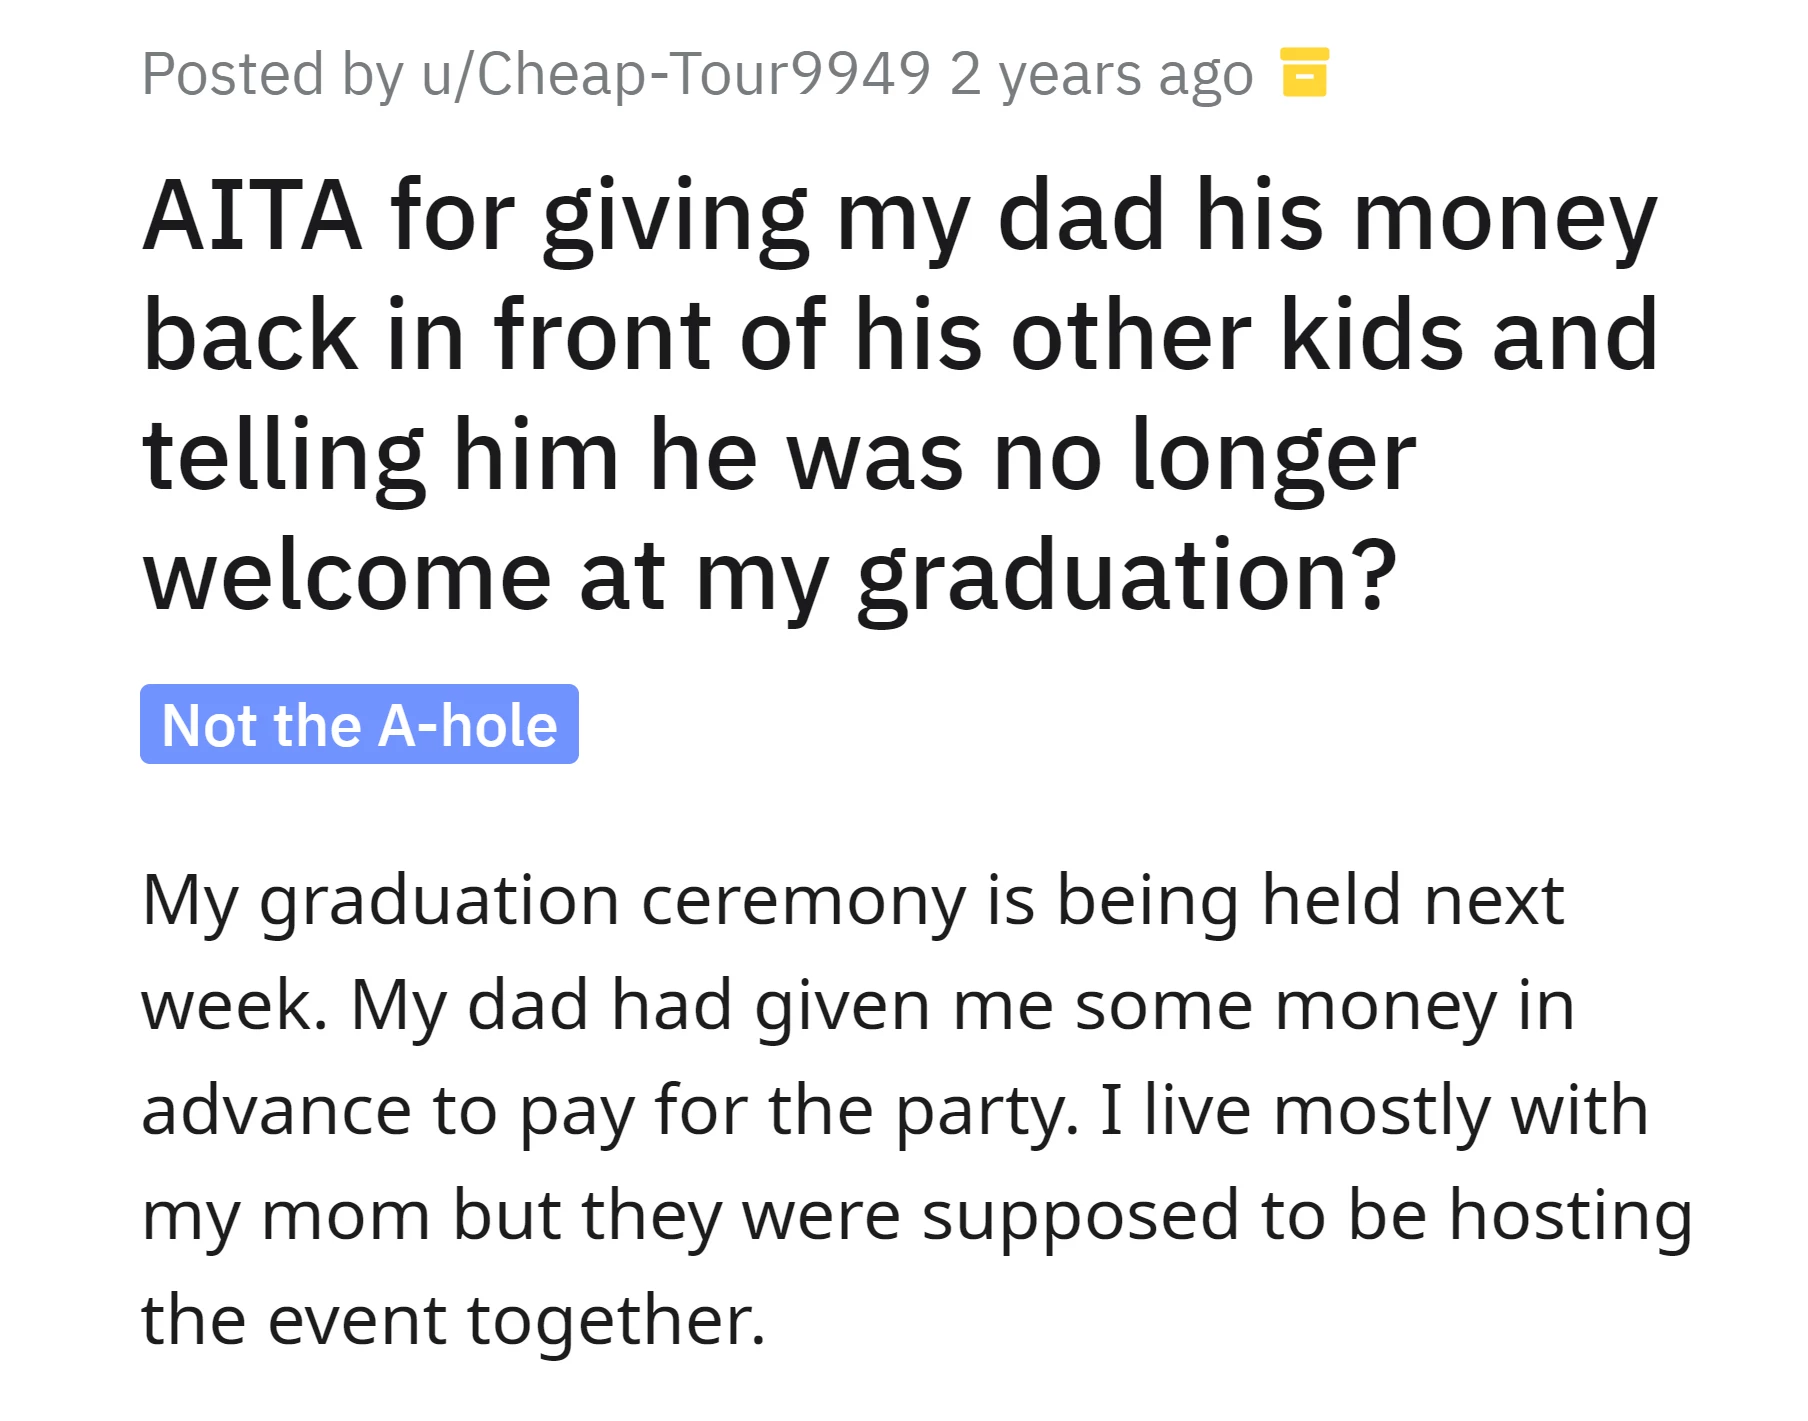 Both OP's mom and dad were initially planning to host the graduation party together